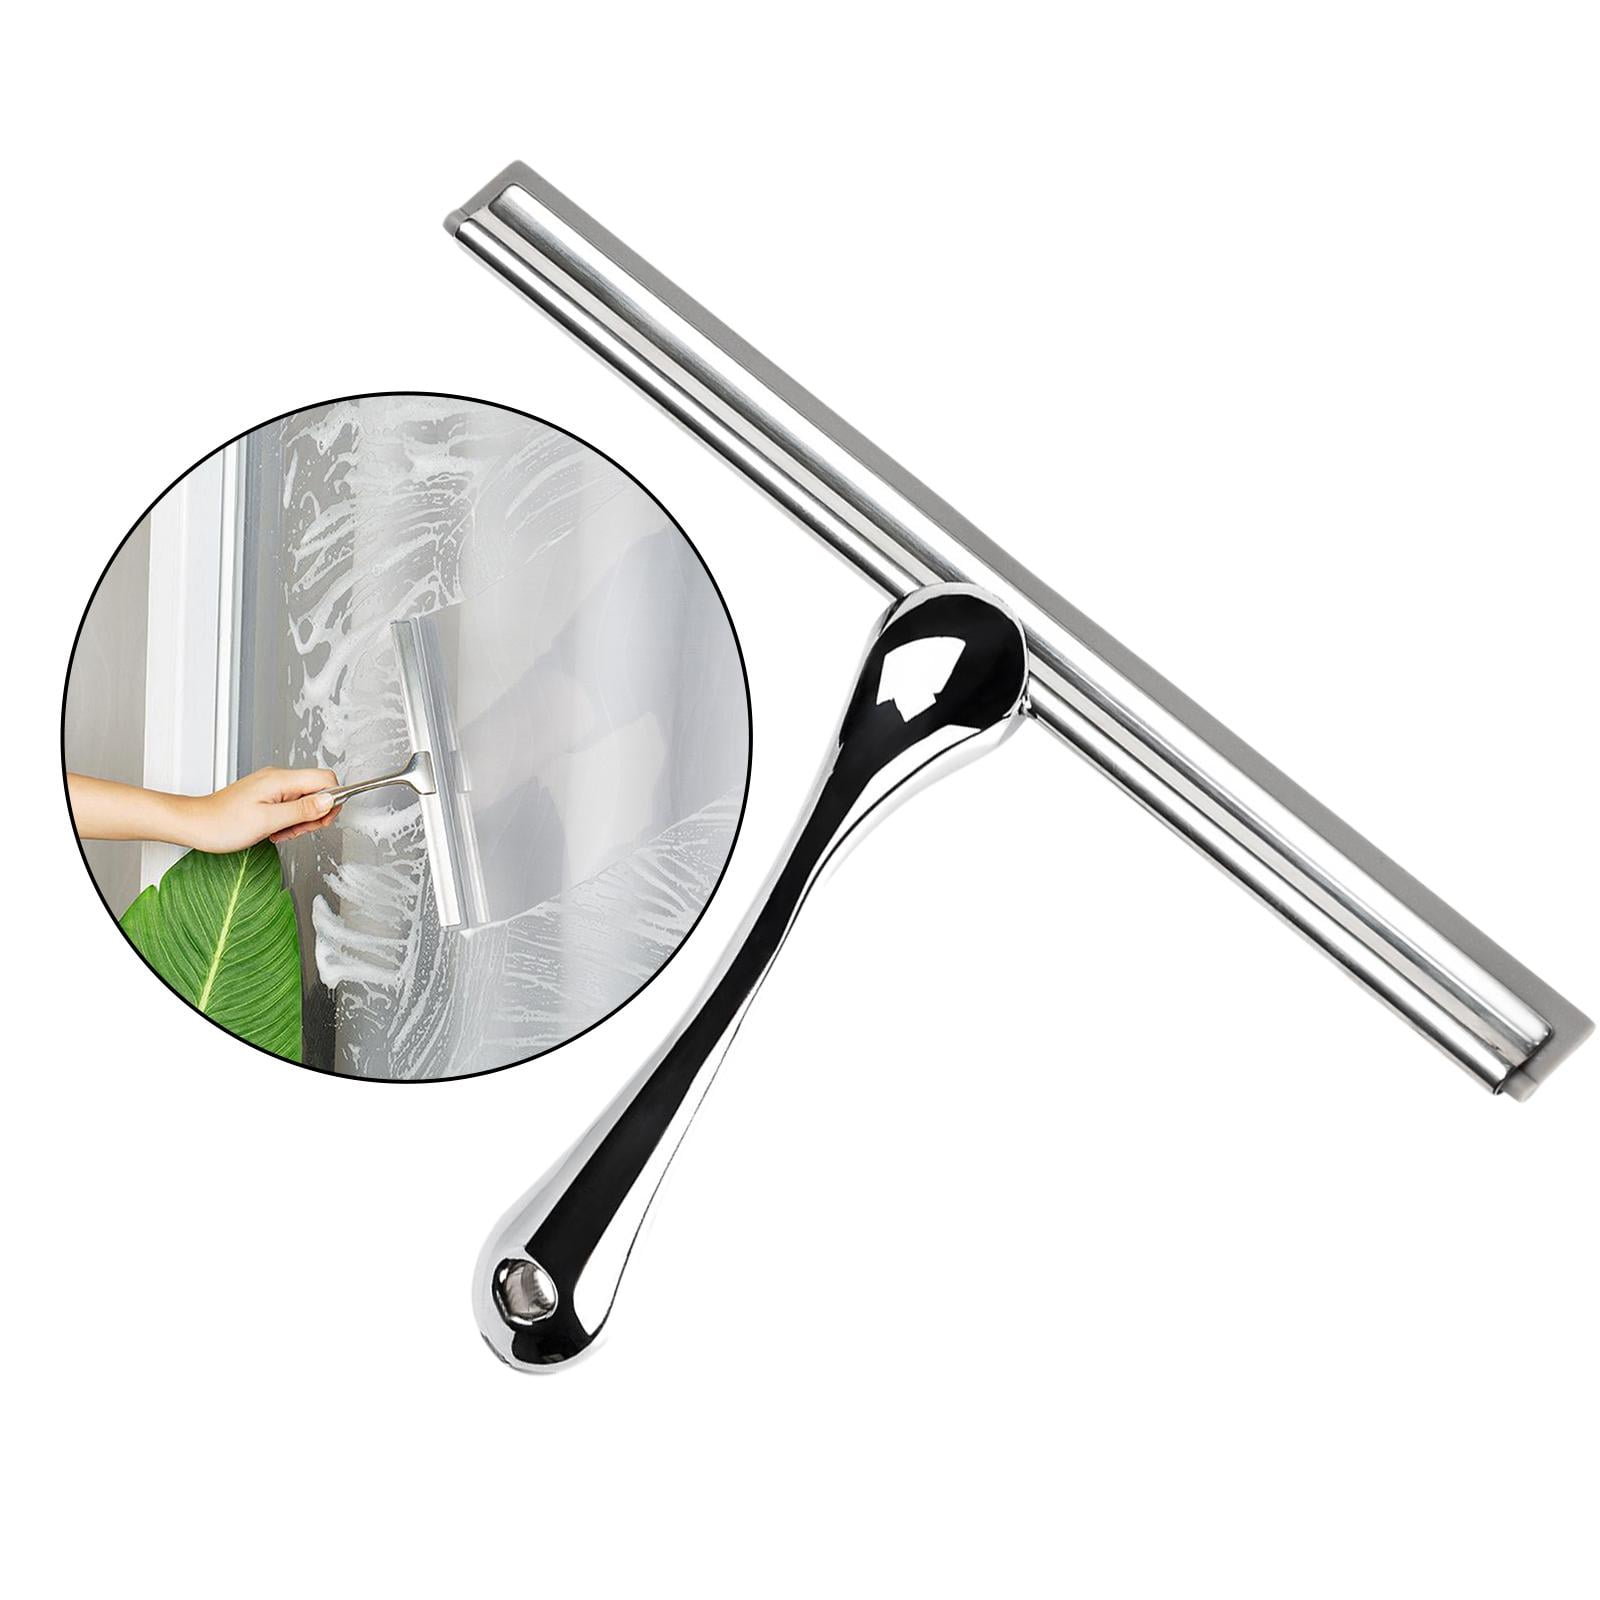 All-Purpose Shower Squeegee for Shower Doors - GDHH1230 - IdeaStage  Promotional Products